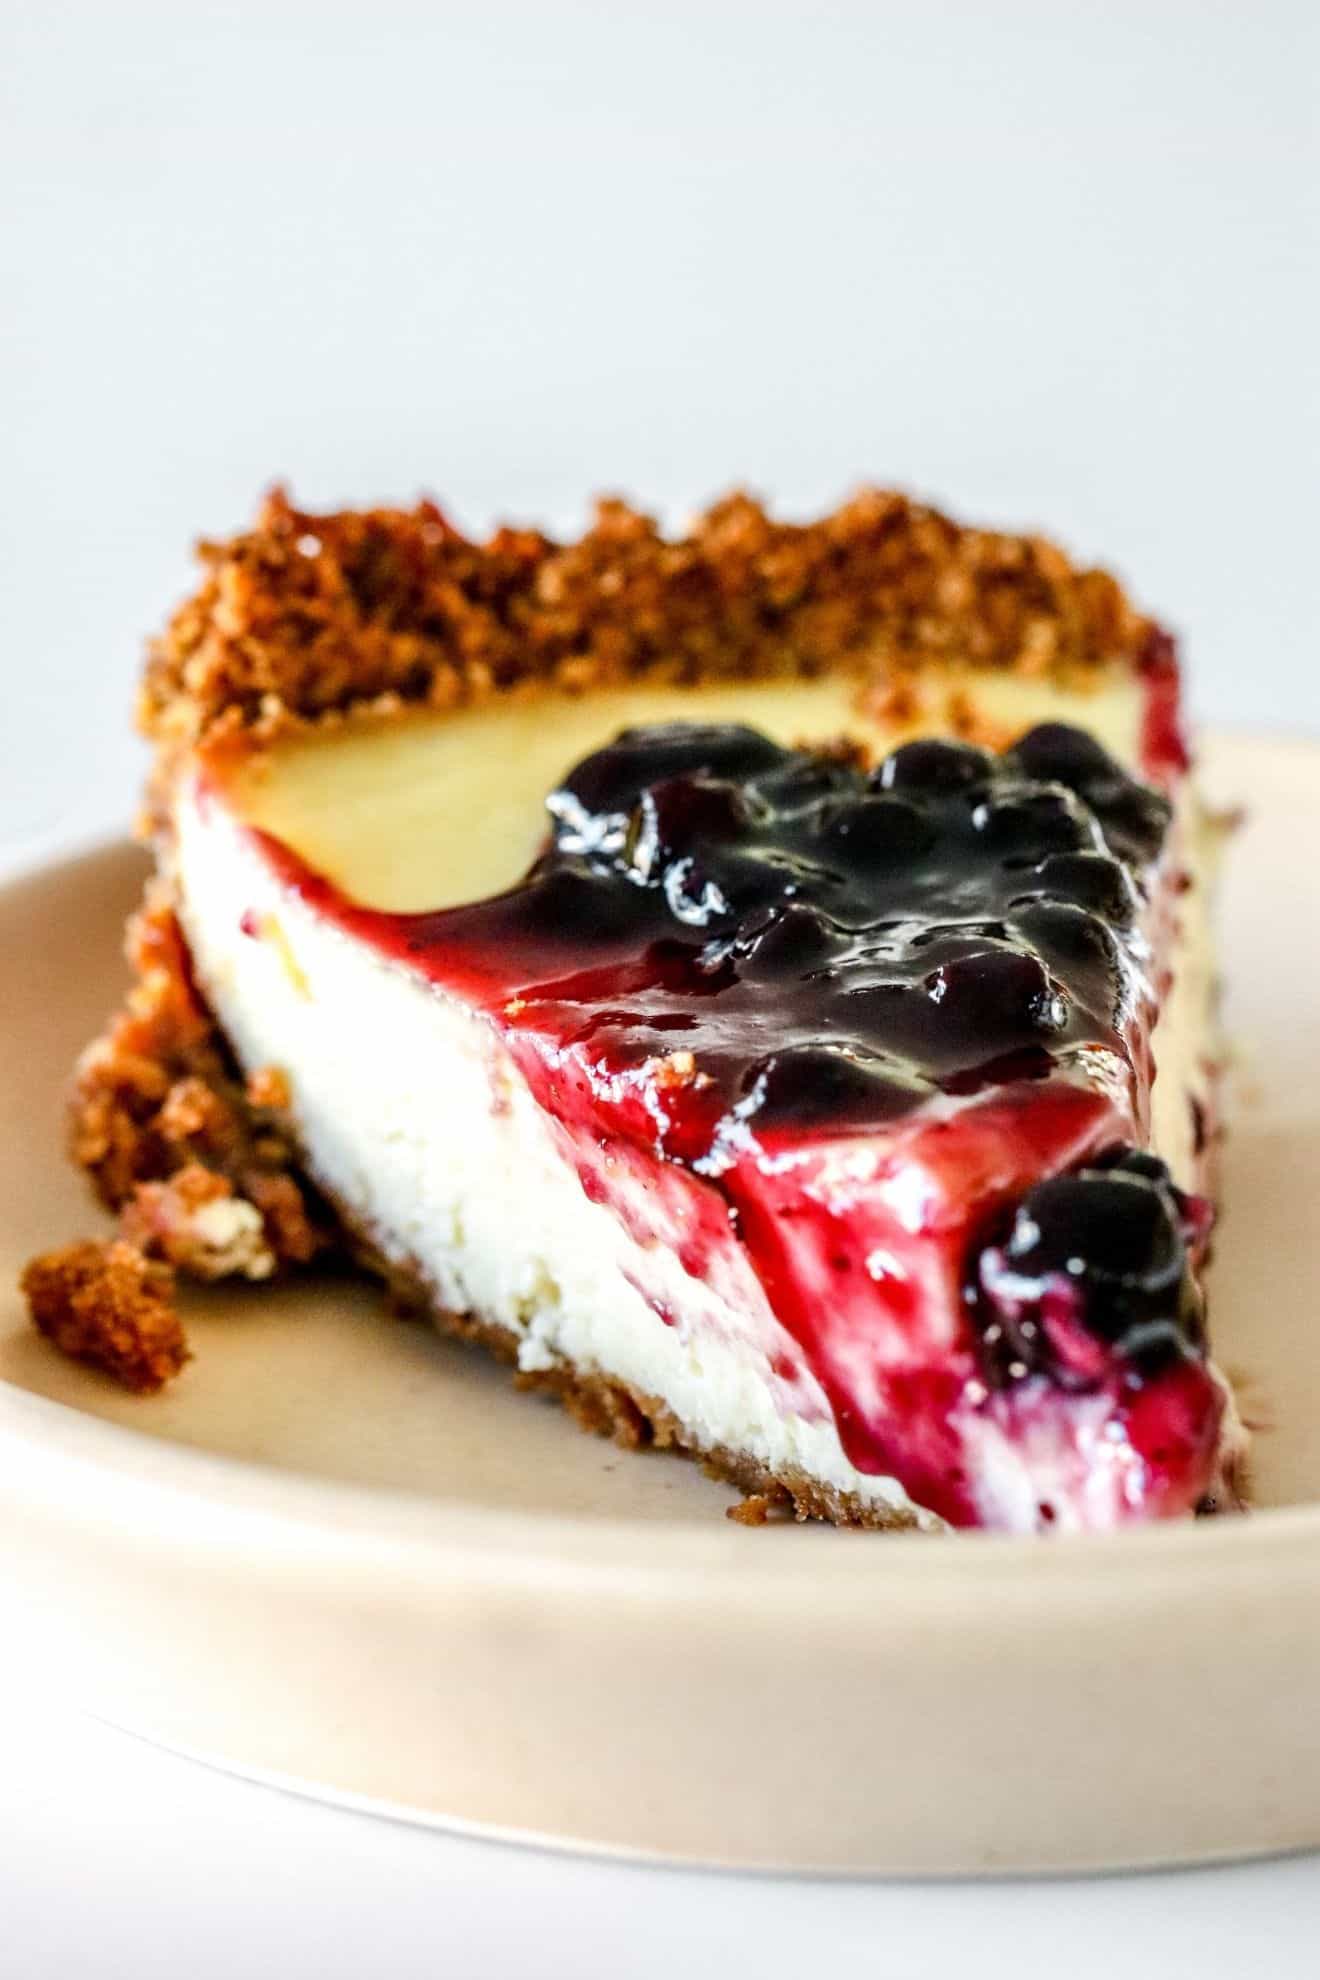 This is a side view of a slice of cream cheese pie. The slice is on a small beige plate and is topped with blueberry jam. The plate sits on a white counter with a white background.